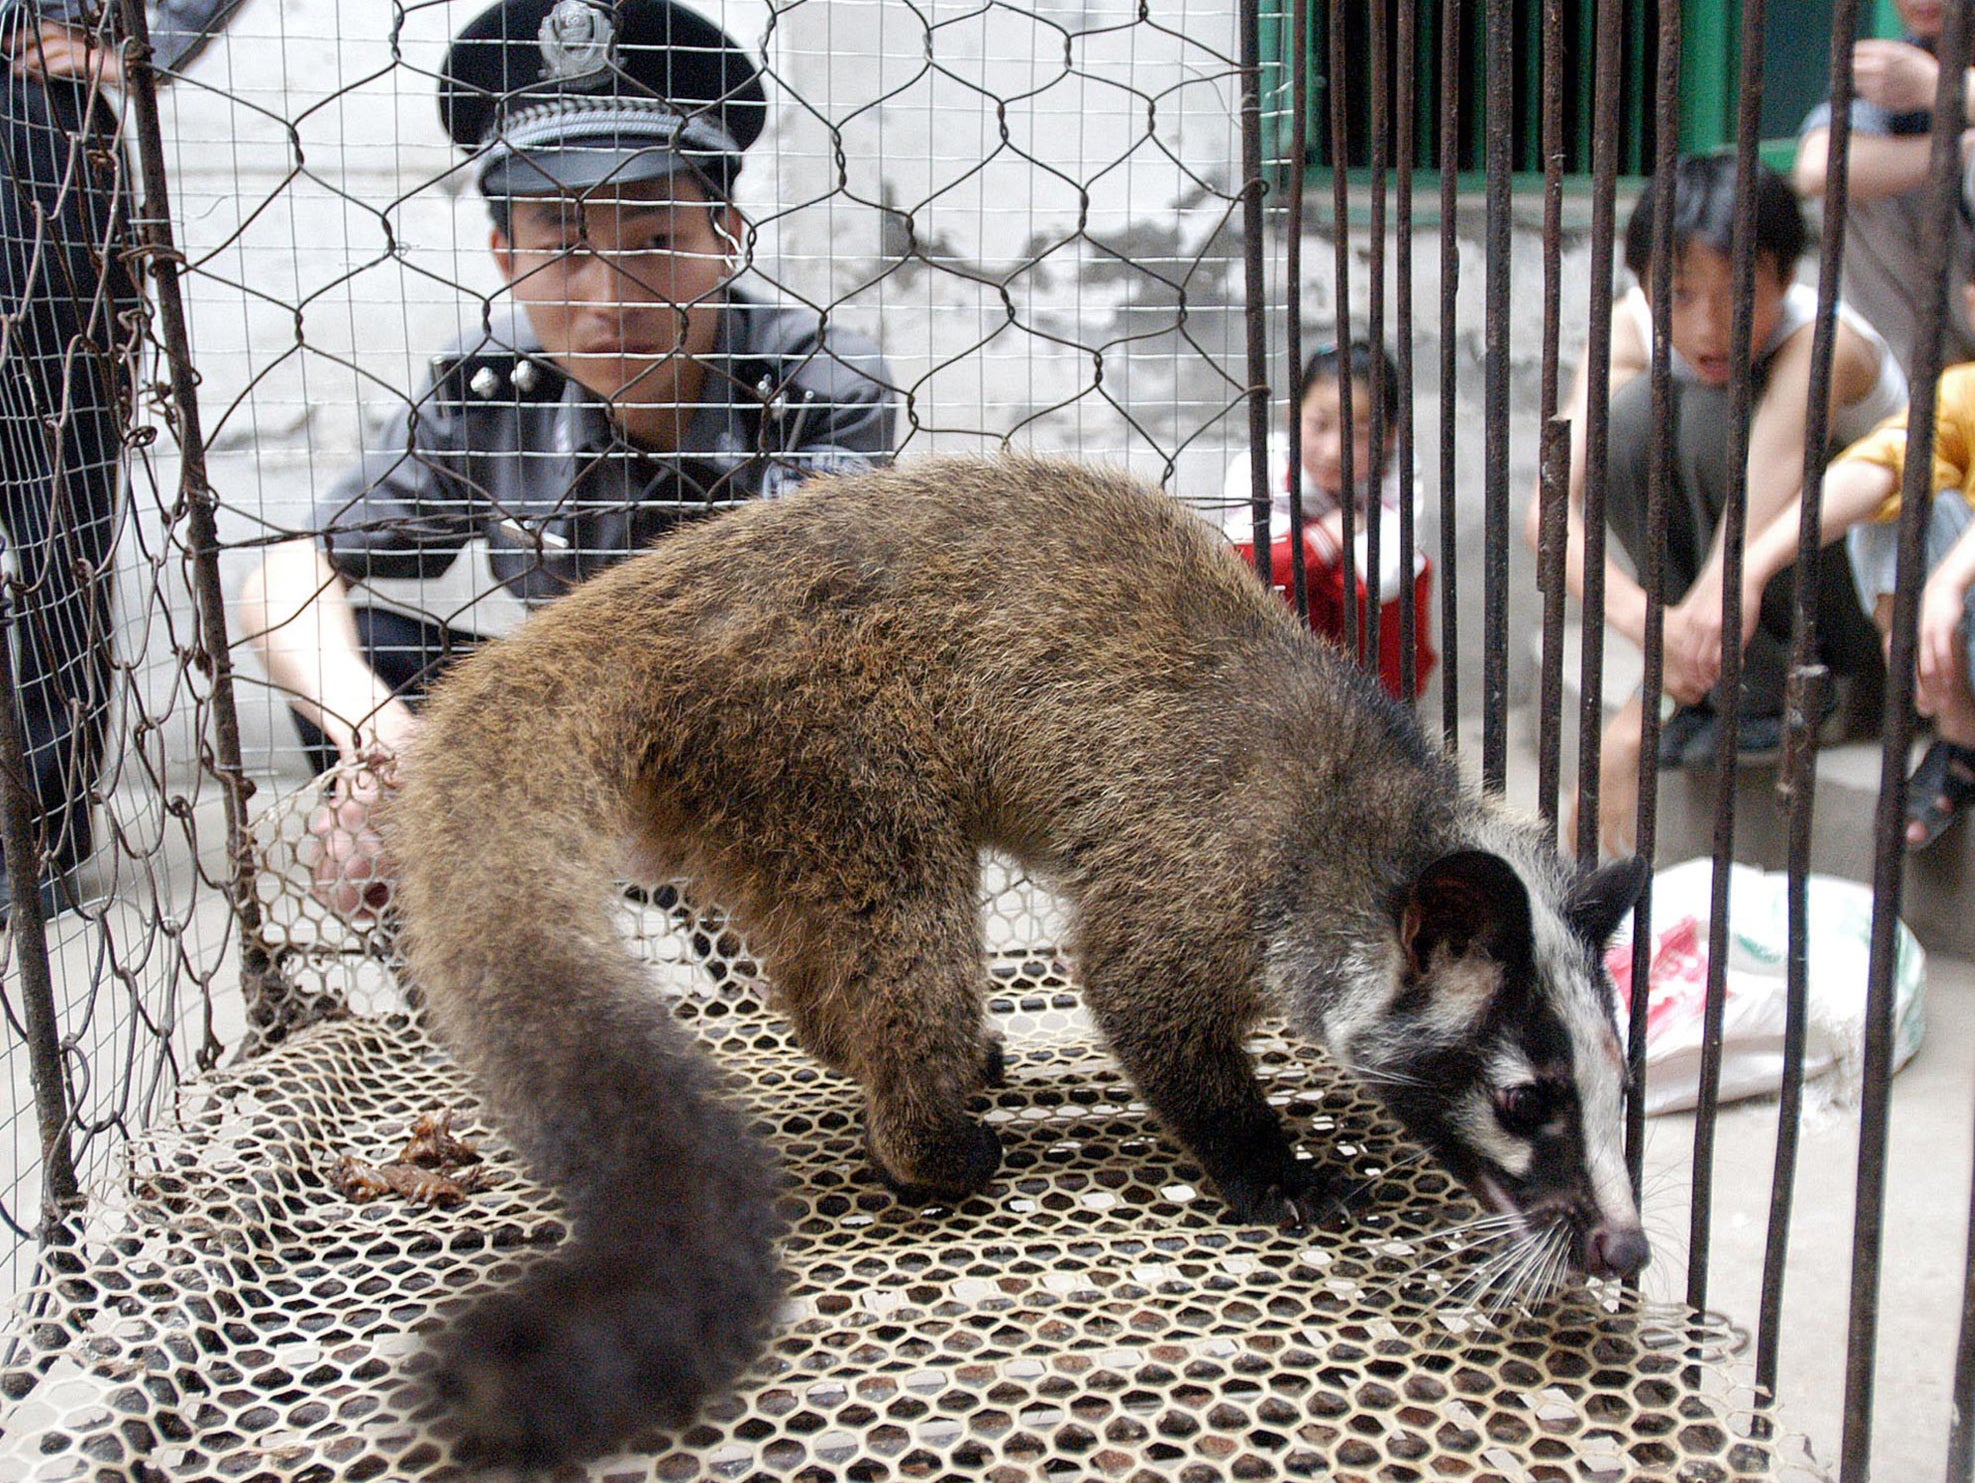 The experts believe the virus probably crossed from wildlife into farmed or domesticated animals in the Wuhan market, and from there to people